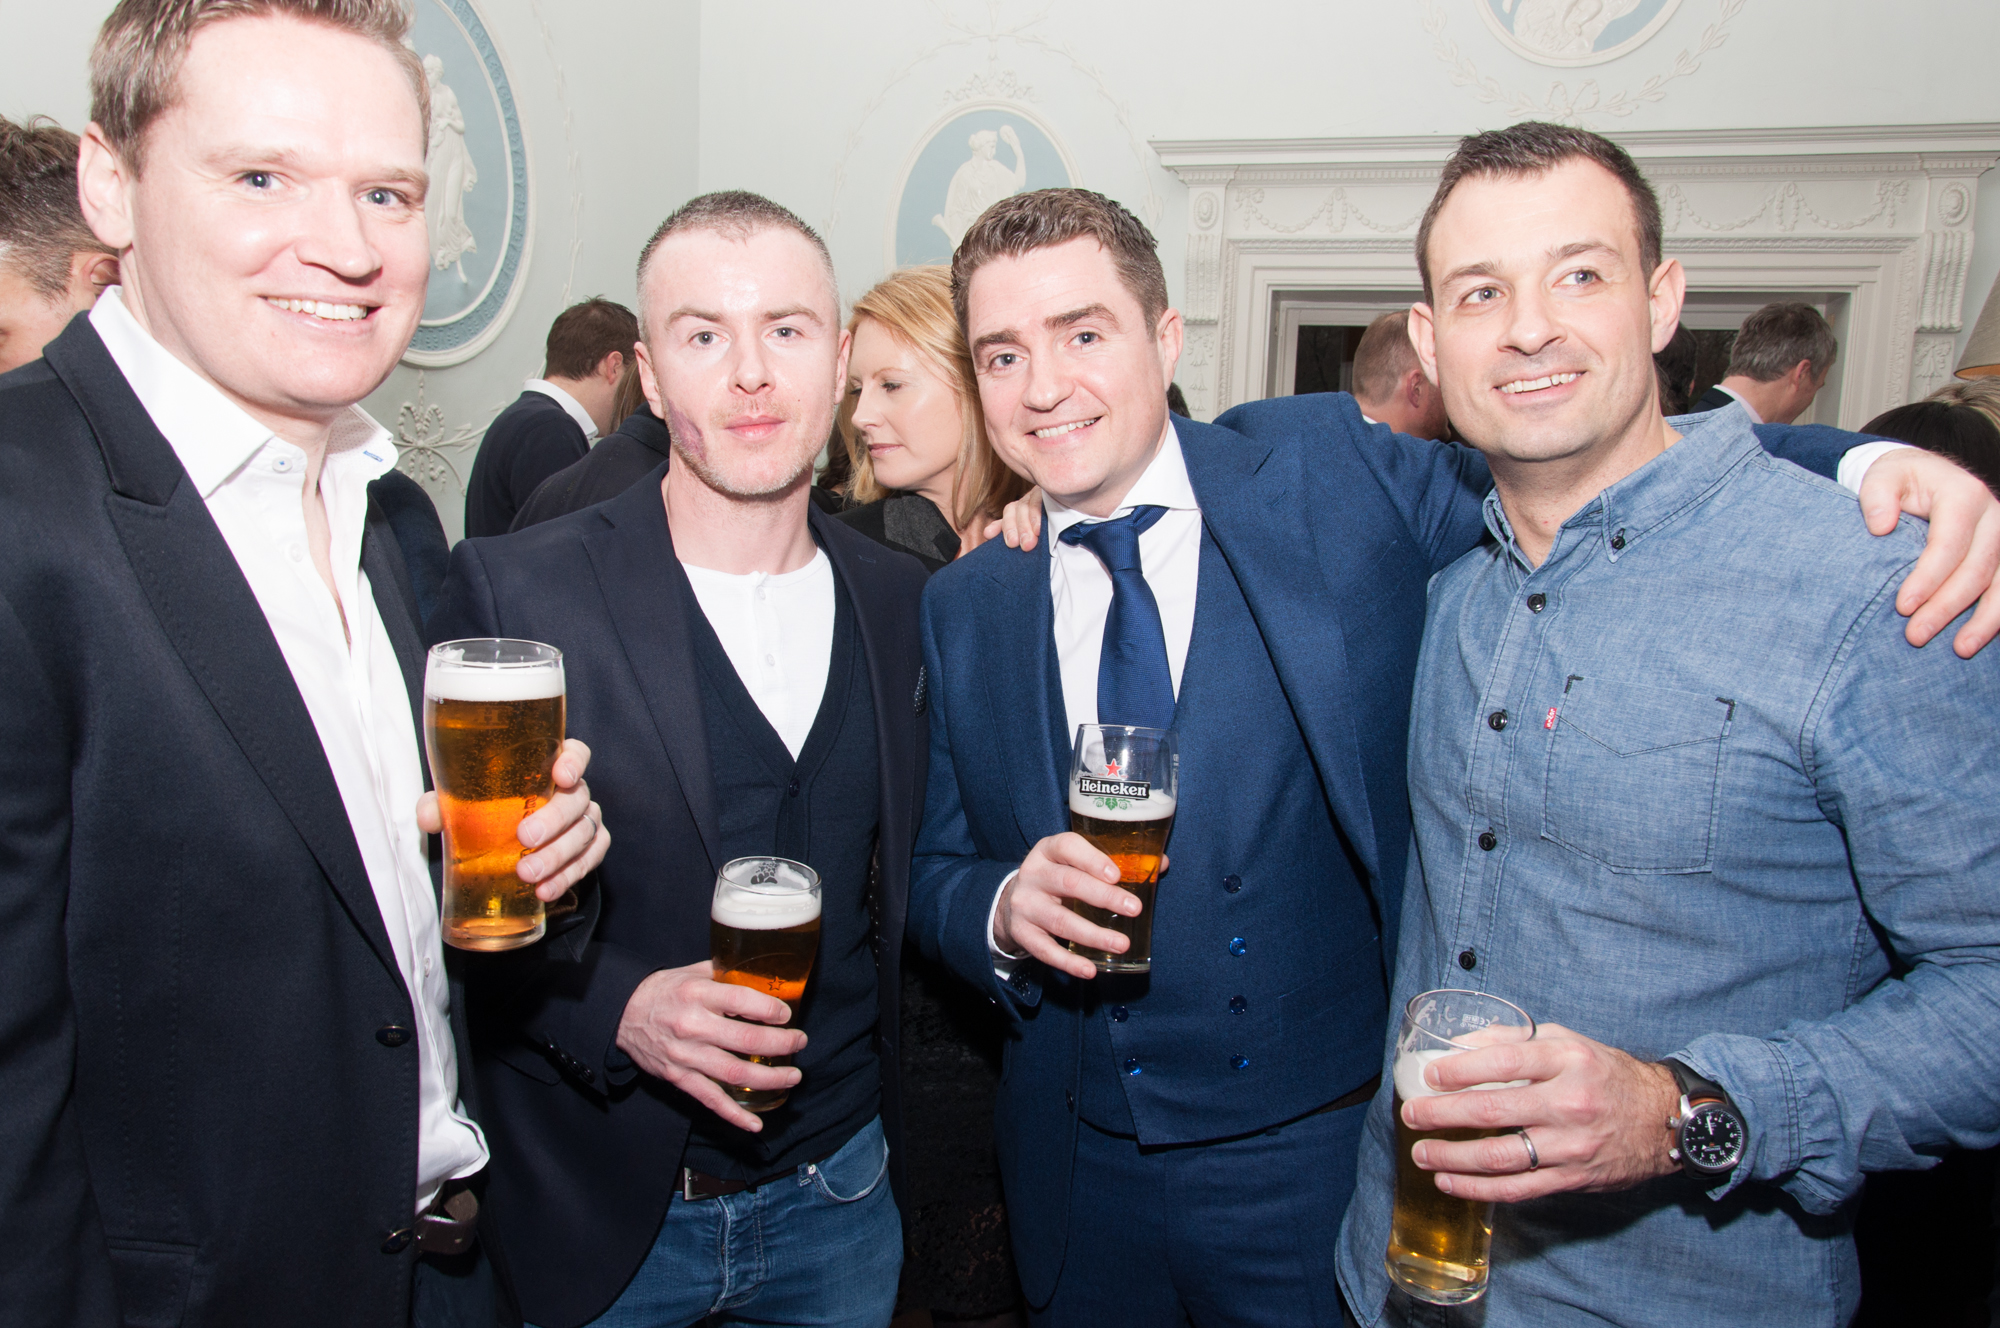 St Gerard's School Past Pupils Union Lunch at Shelbourne Hotel by Natalia Marzec_ low res100